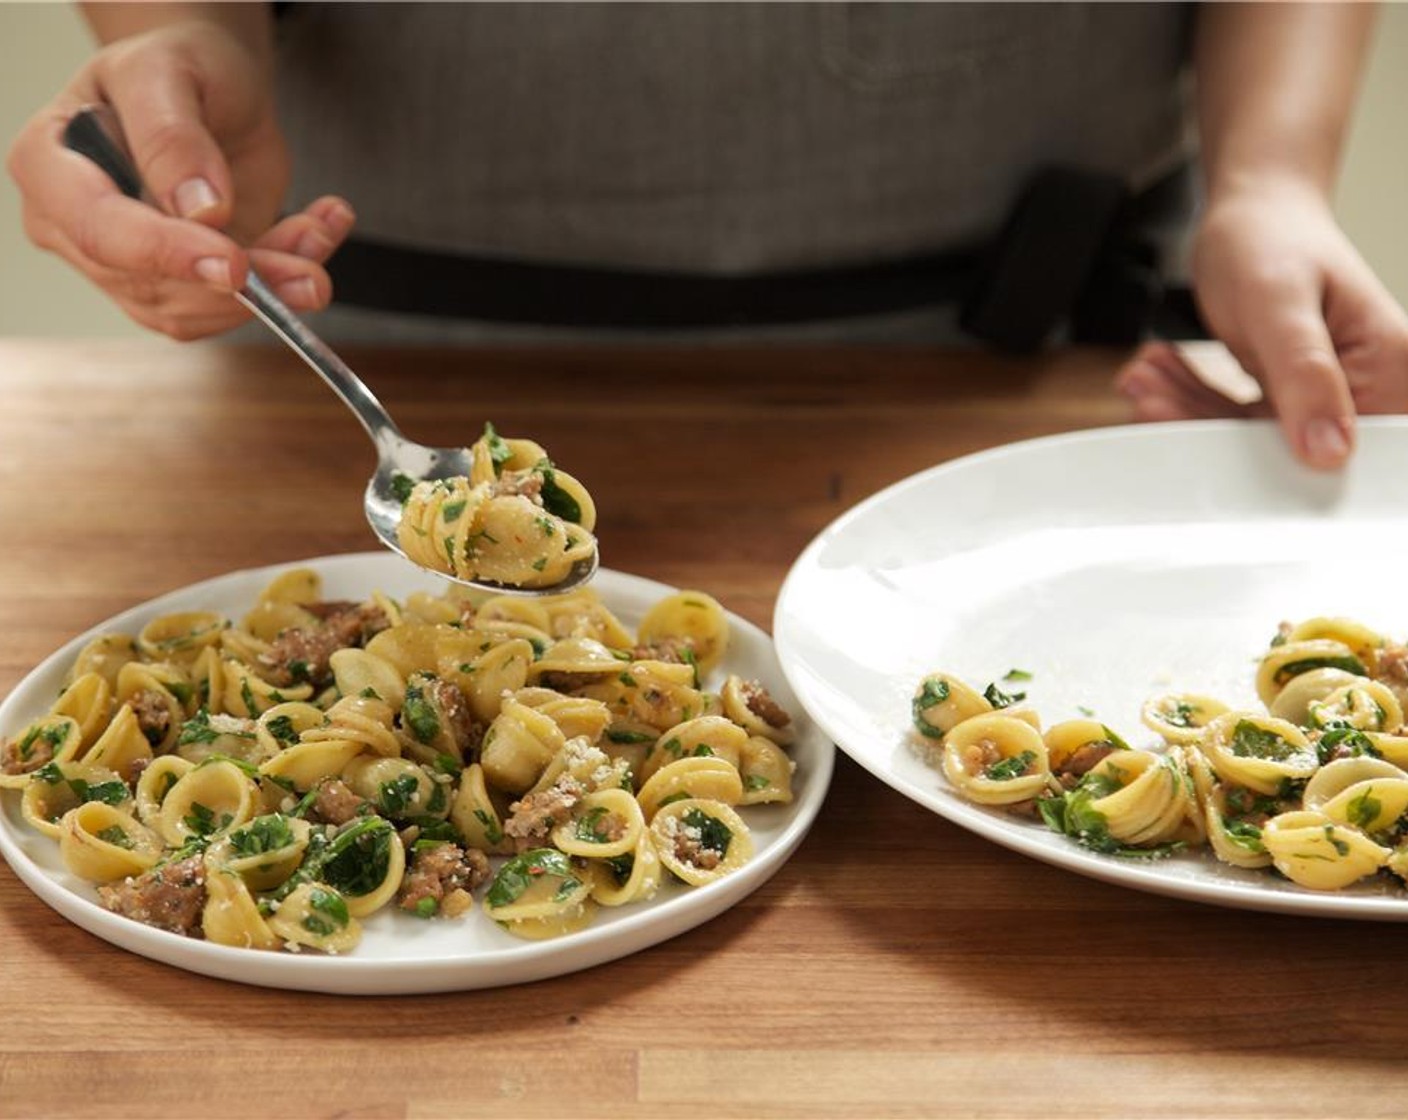 step 9 Evenly distribute the orecchiette pasta between two plates. Garnish with Parmesan Cheese (1/4 cup).